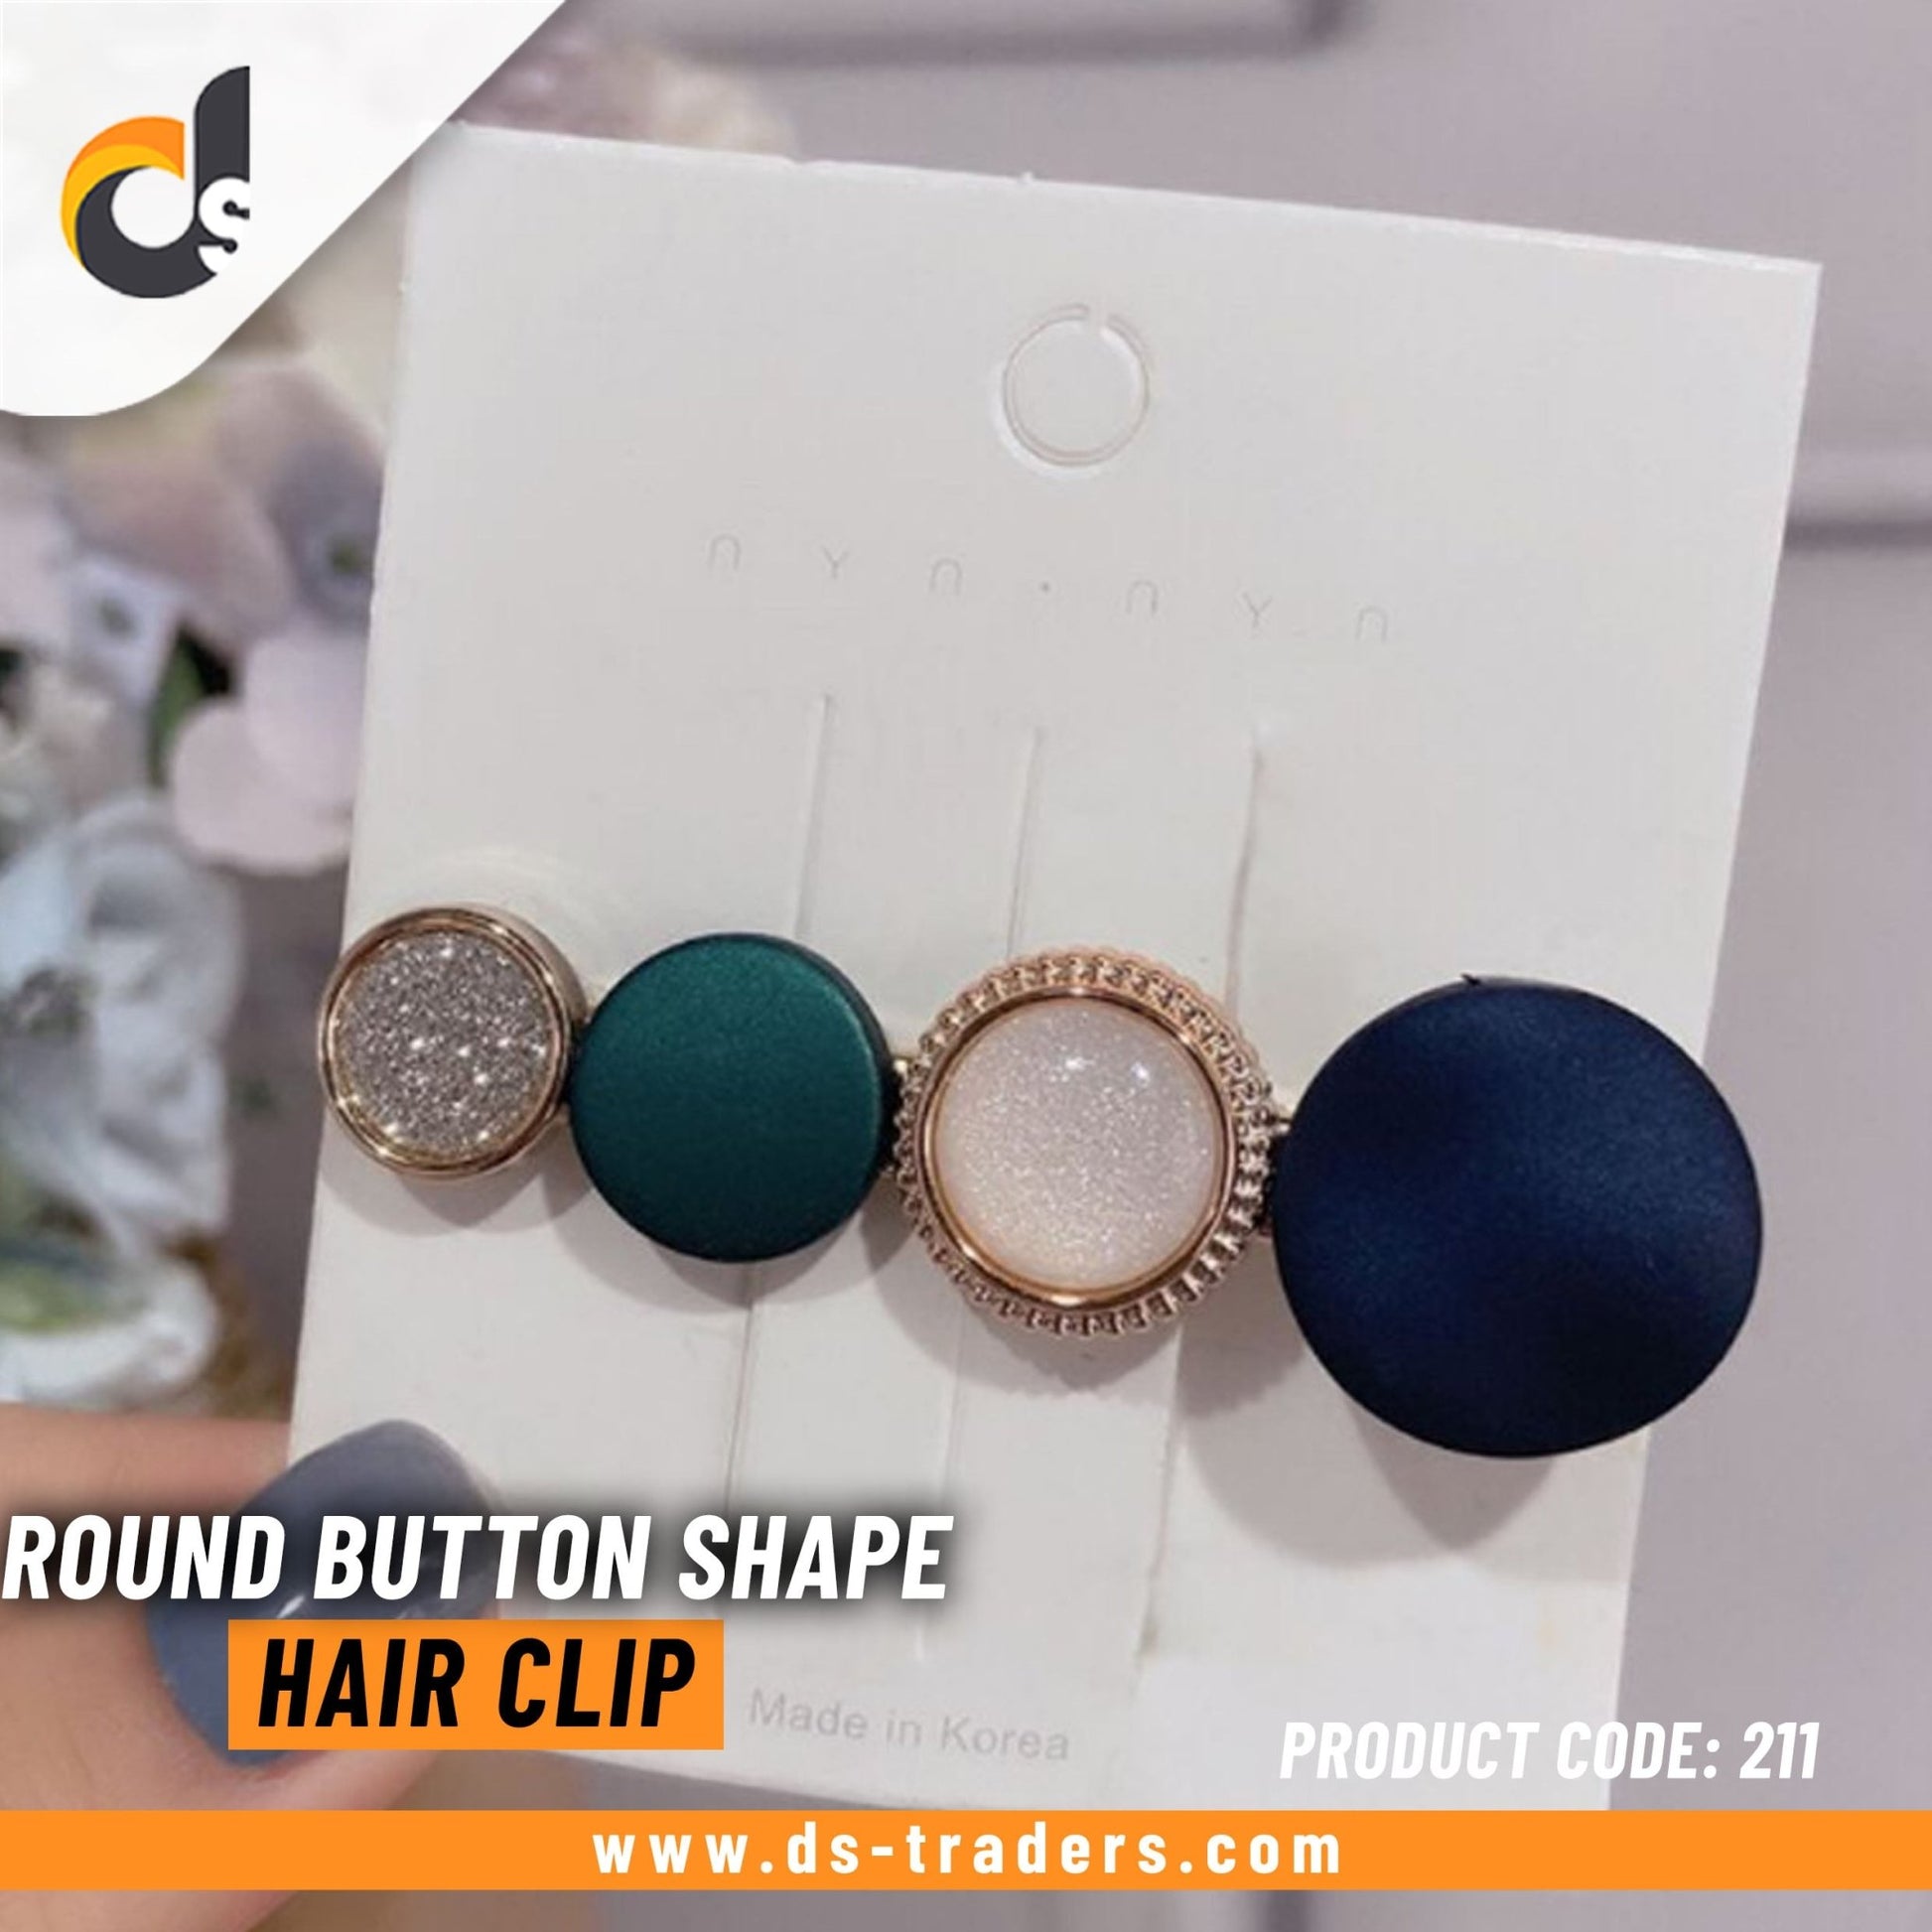 Round Button Shape Hair Clip - DS Traders